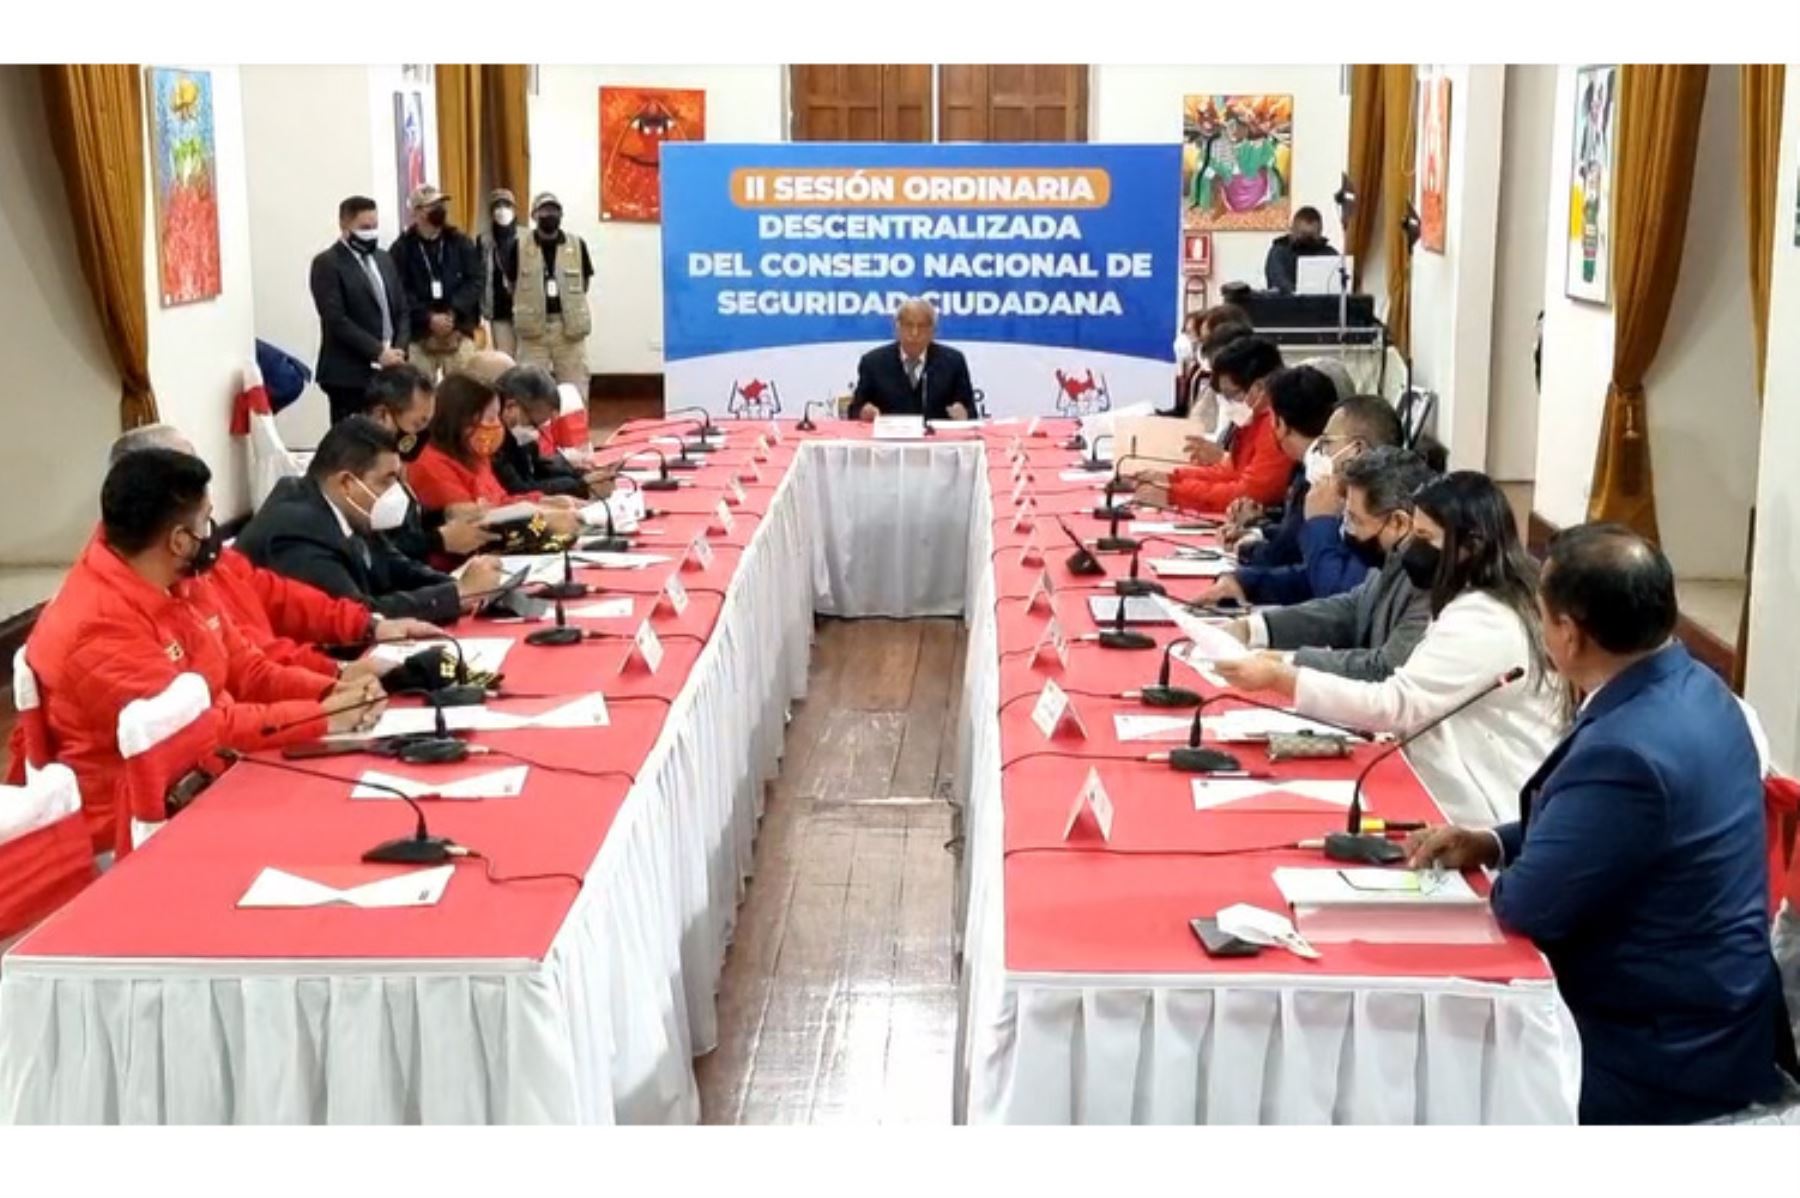 Photo: ANDINA/Presidency of the Council of Ministers (PCM) of Peru.